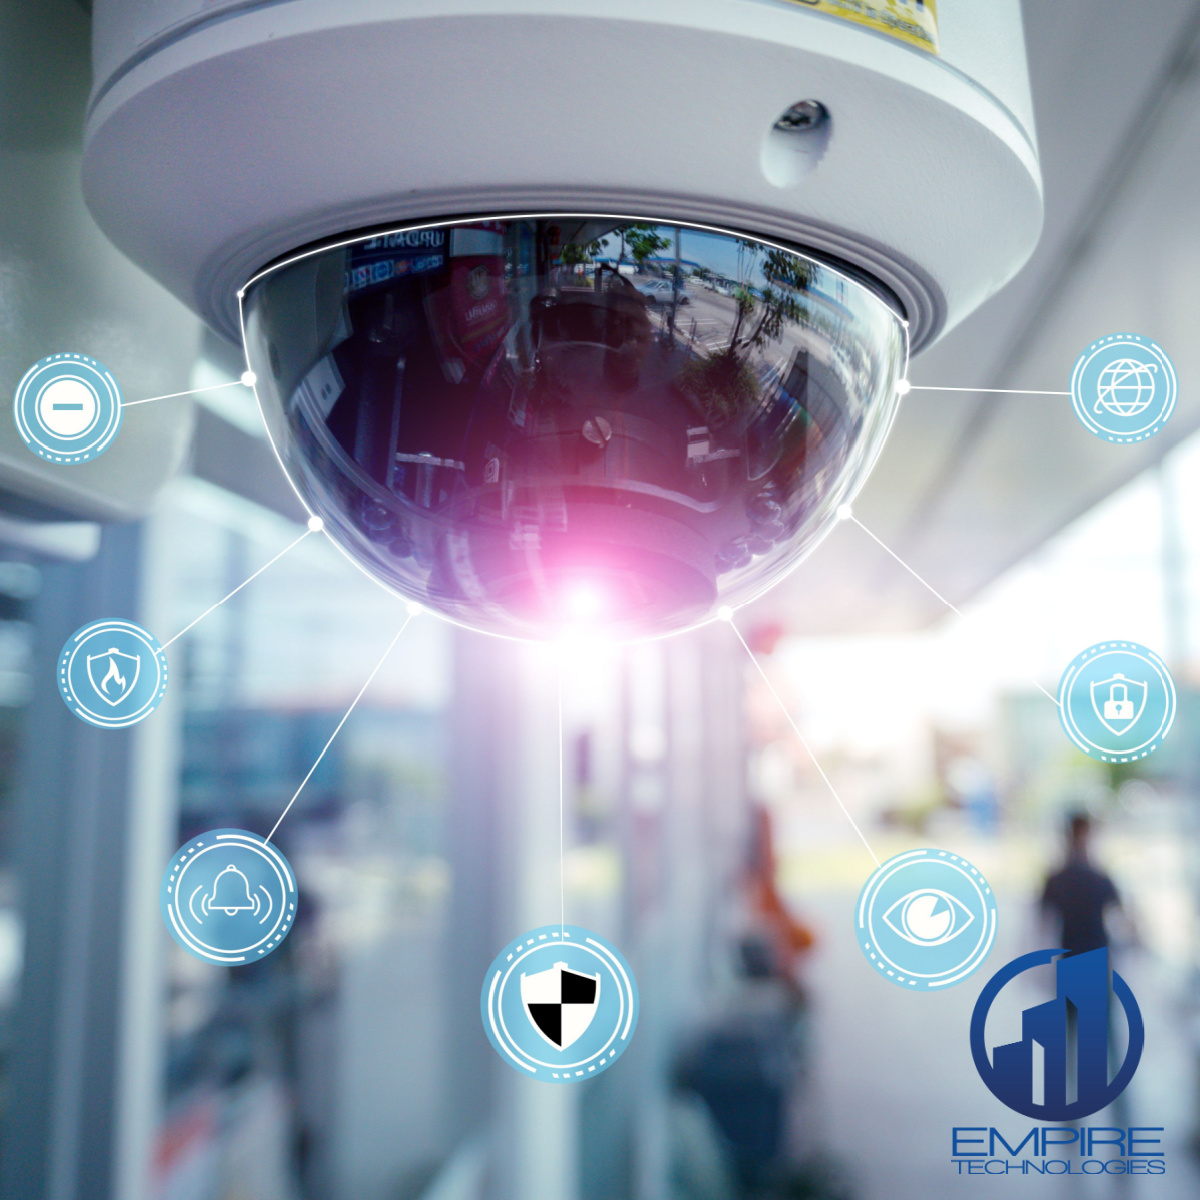 How Do I Know If My Business Needs a CCTV Security System?